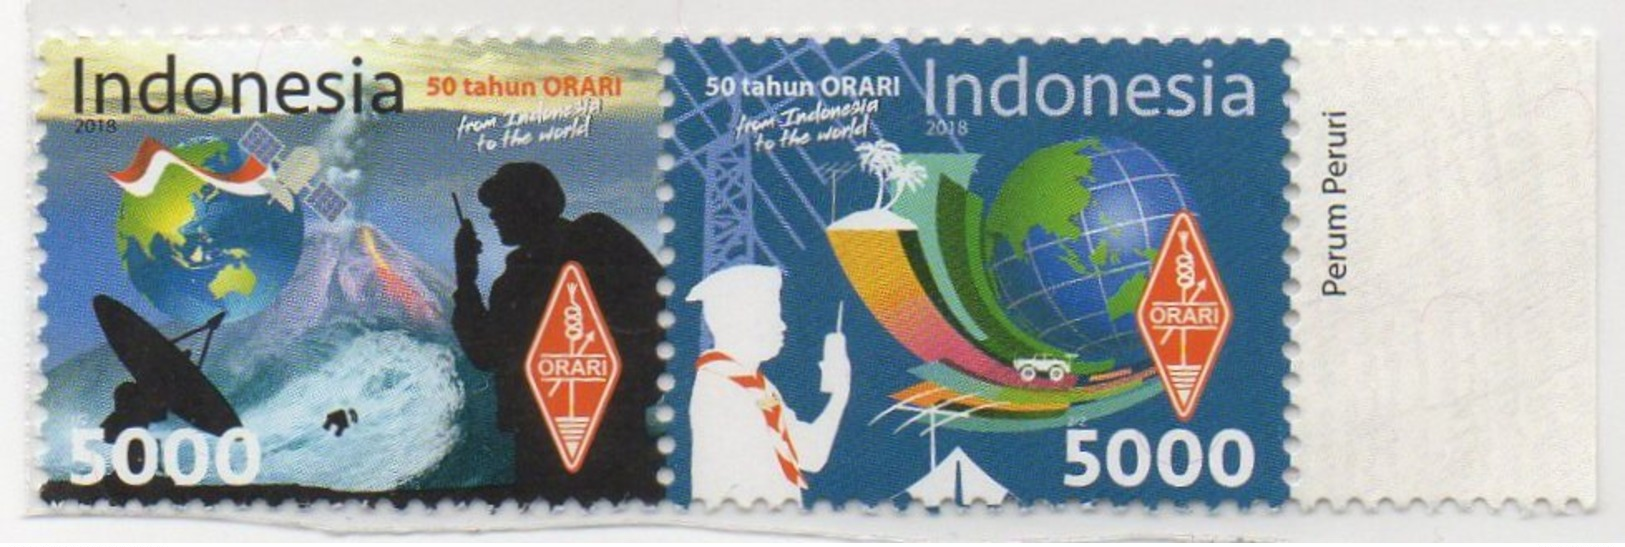 INDONESIA 2018-5 50 YEARS SCOUT ORARI AMATEUR RADIO COMMUNICATION SET STAMPS MNH - Indonesia